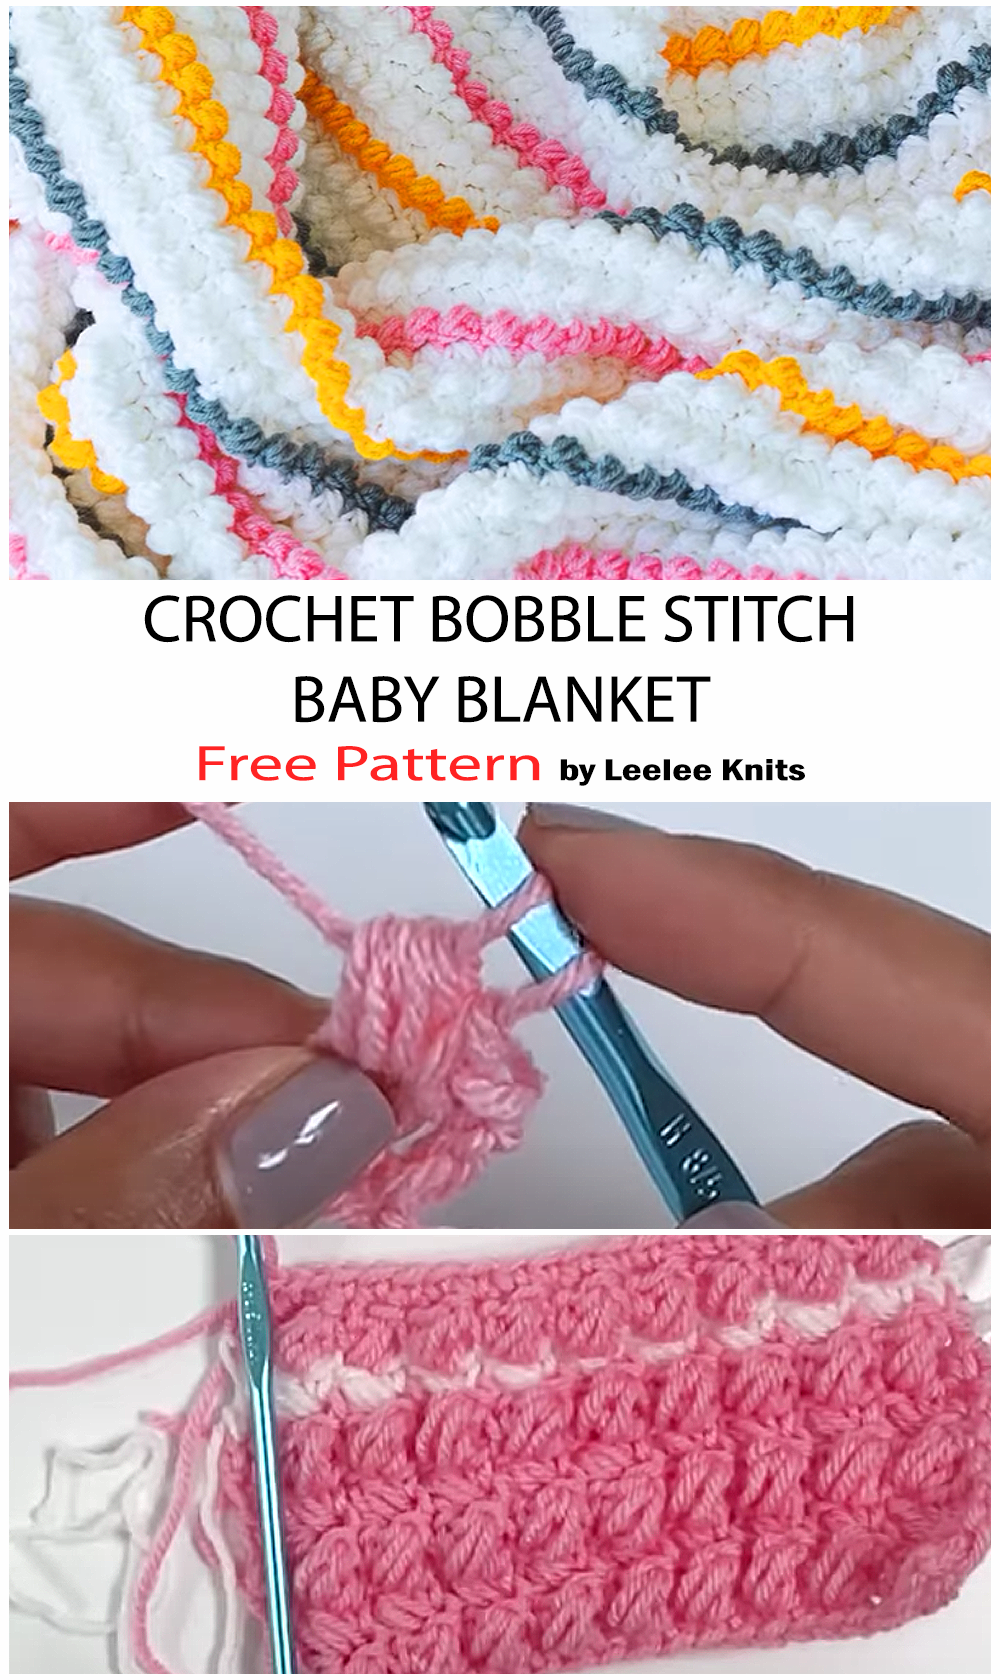 How To Crochet Slanted Bobble Stitch Baby Blanket - Free Pattern For Beginners